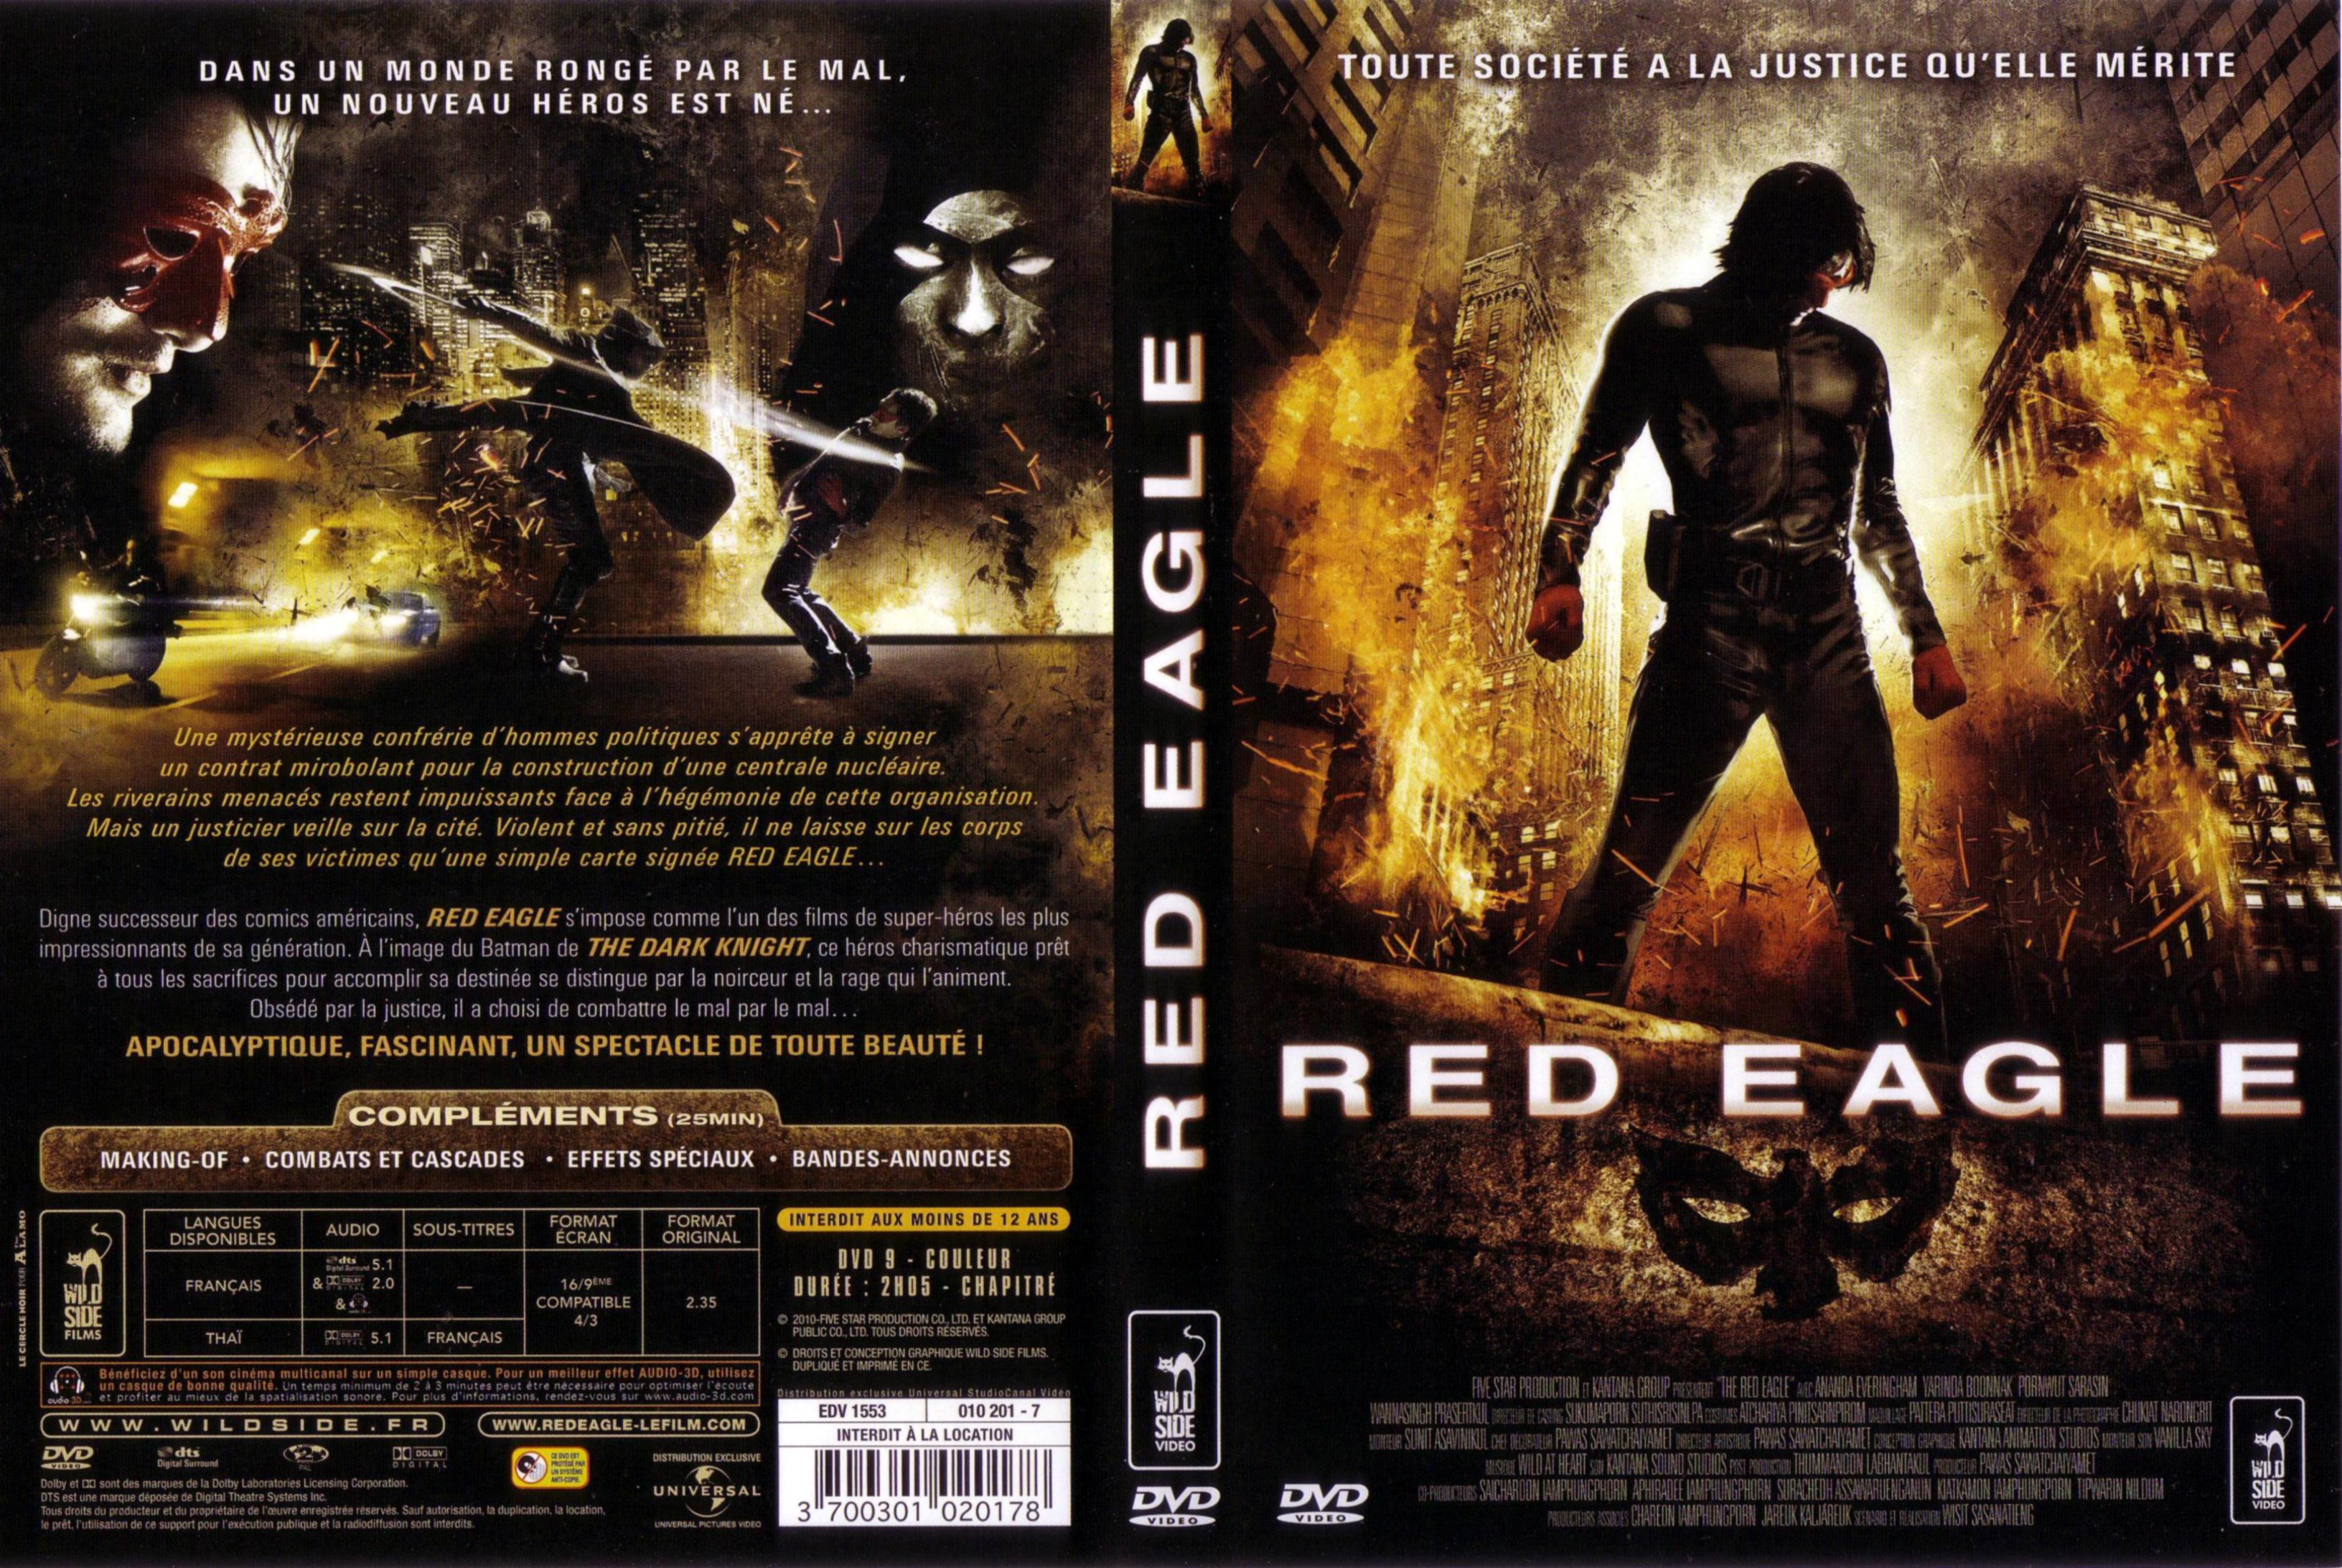 Jaquette DVD Red eagle